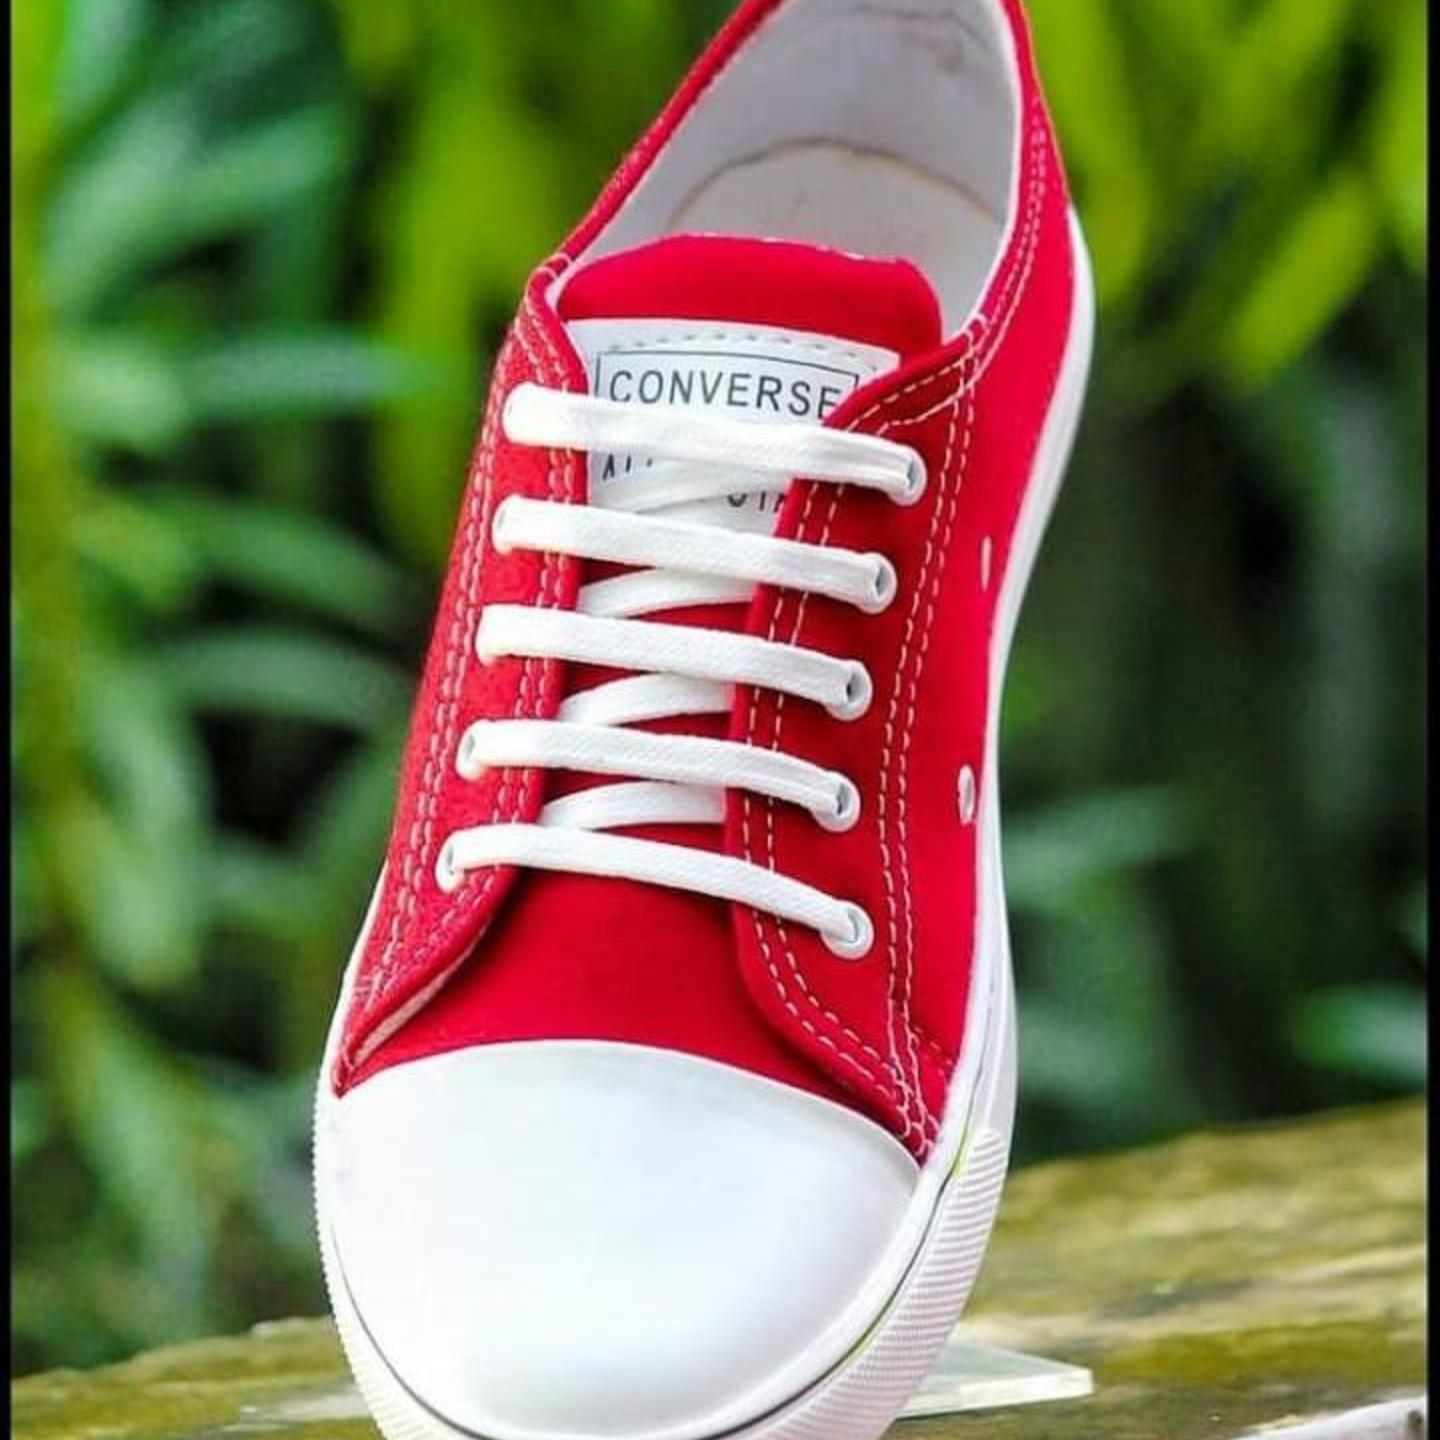 Mens Converse Red Shoes Shop Online - Free Shipping